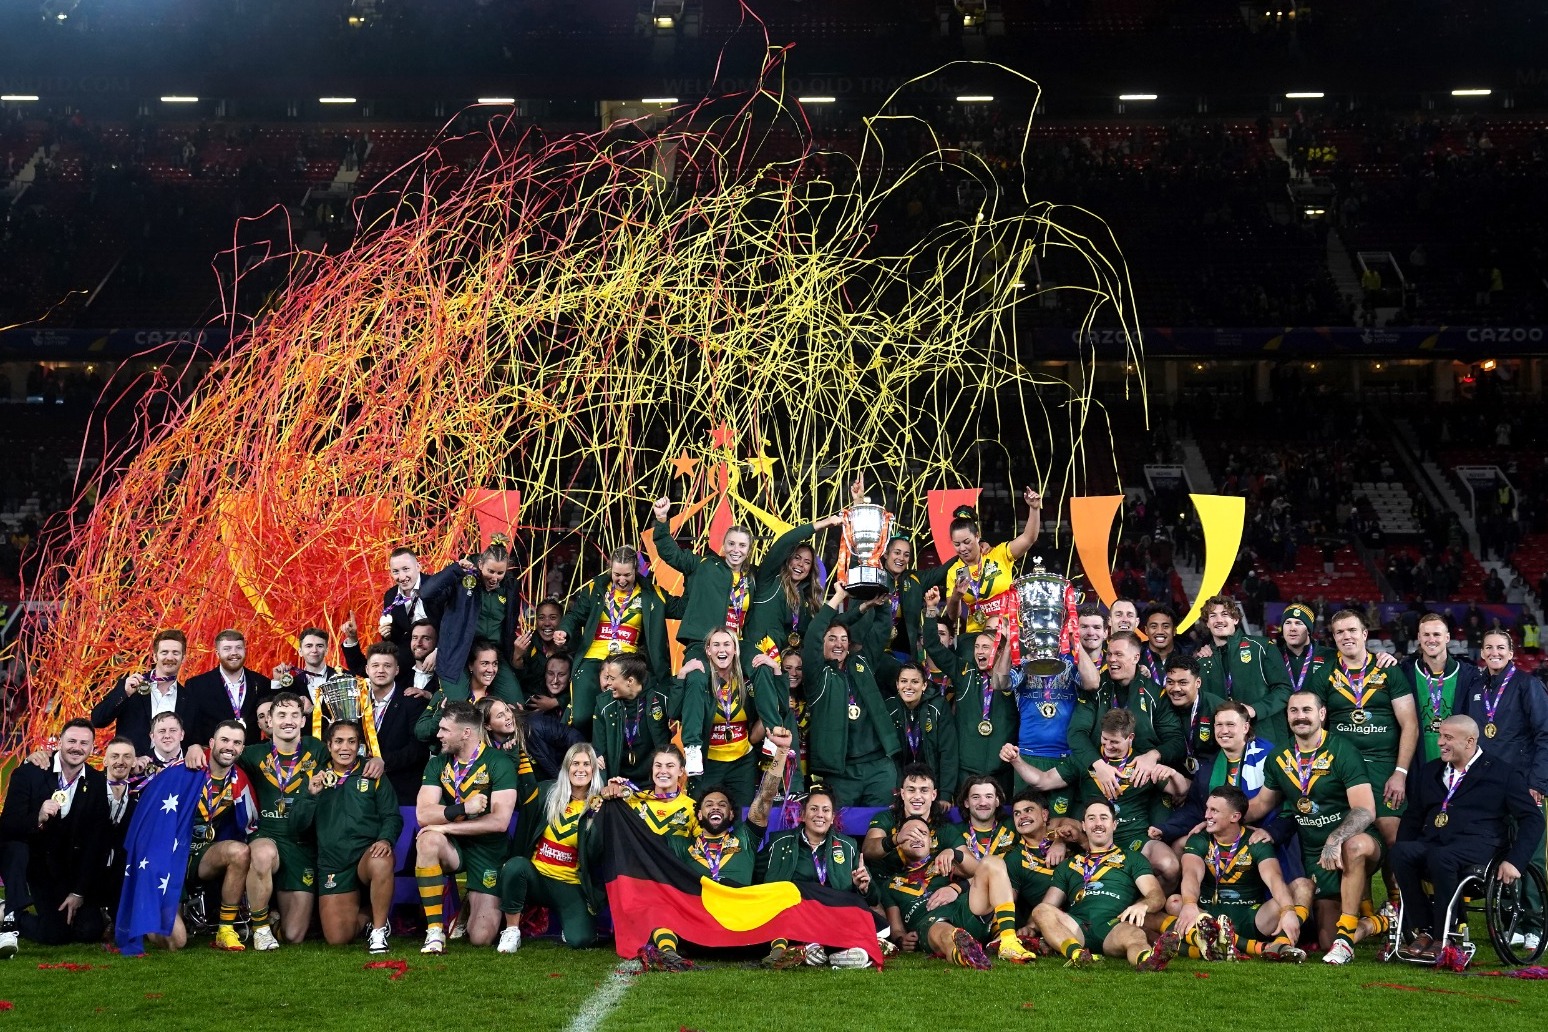 Australia \'do the double\' at Rugby League World Cup, winning both the men\'s and women\'s final 